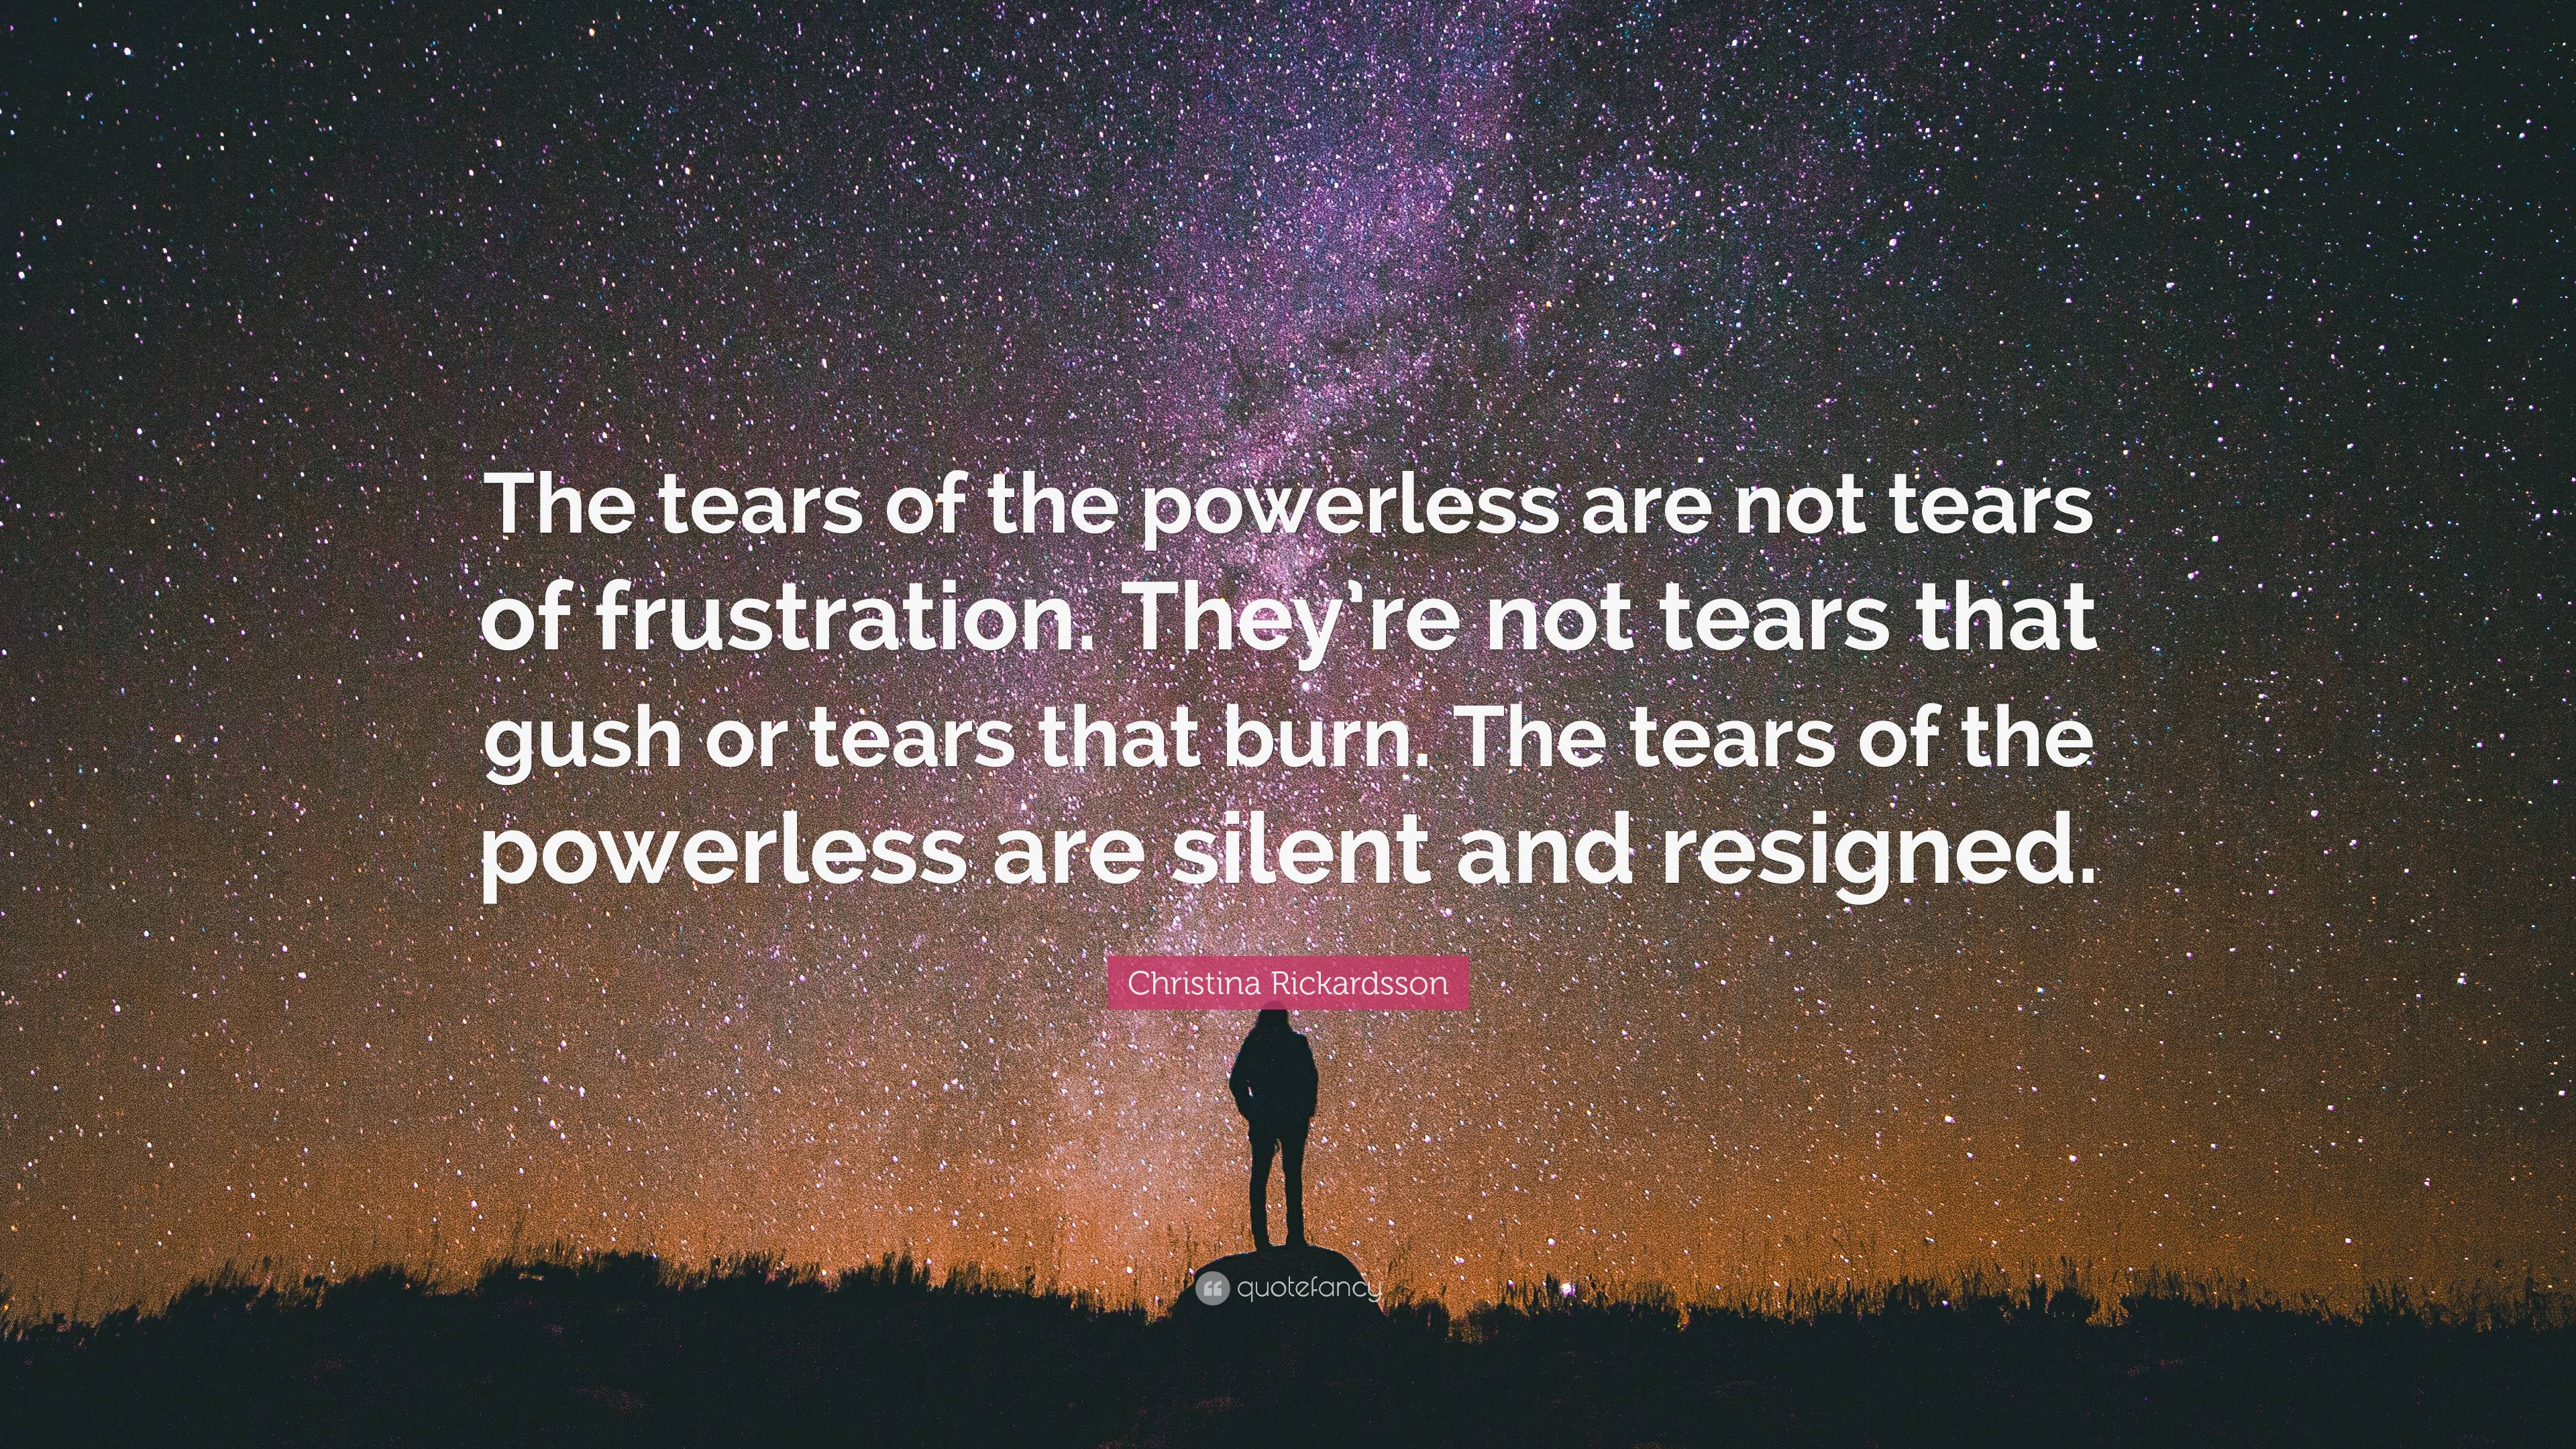 Christina Rickardsson Quote: “The tears of the powerless are not